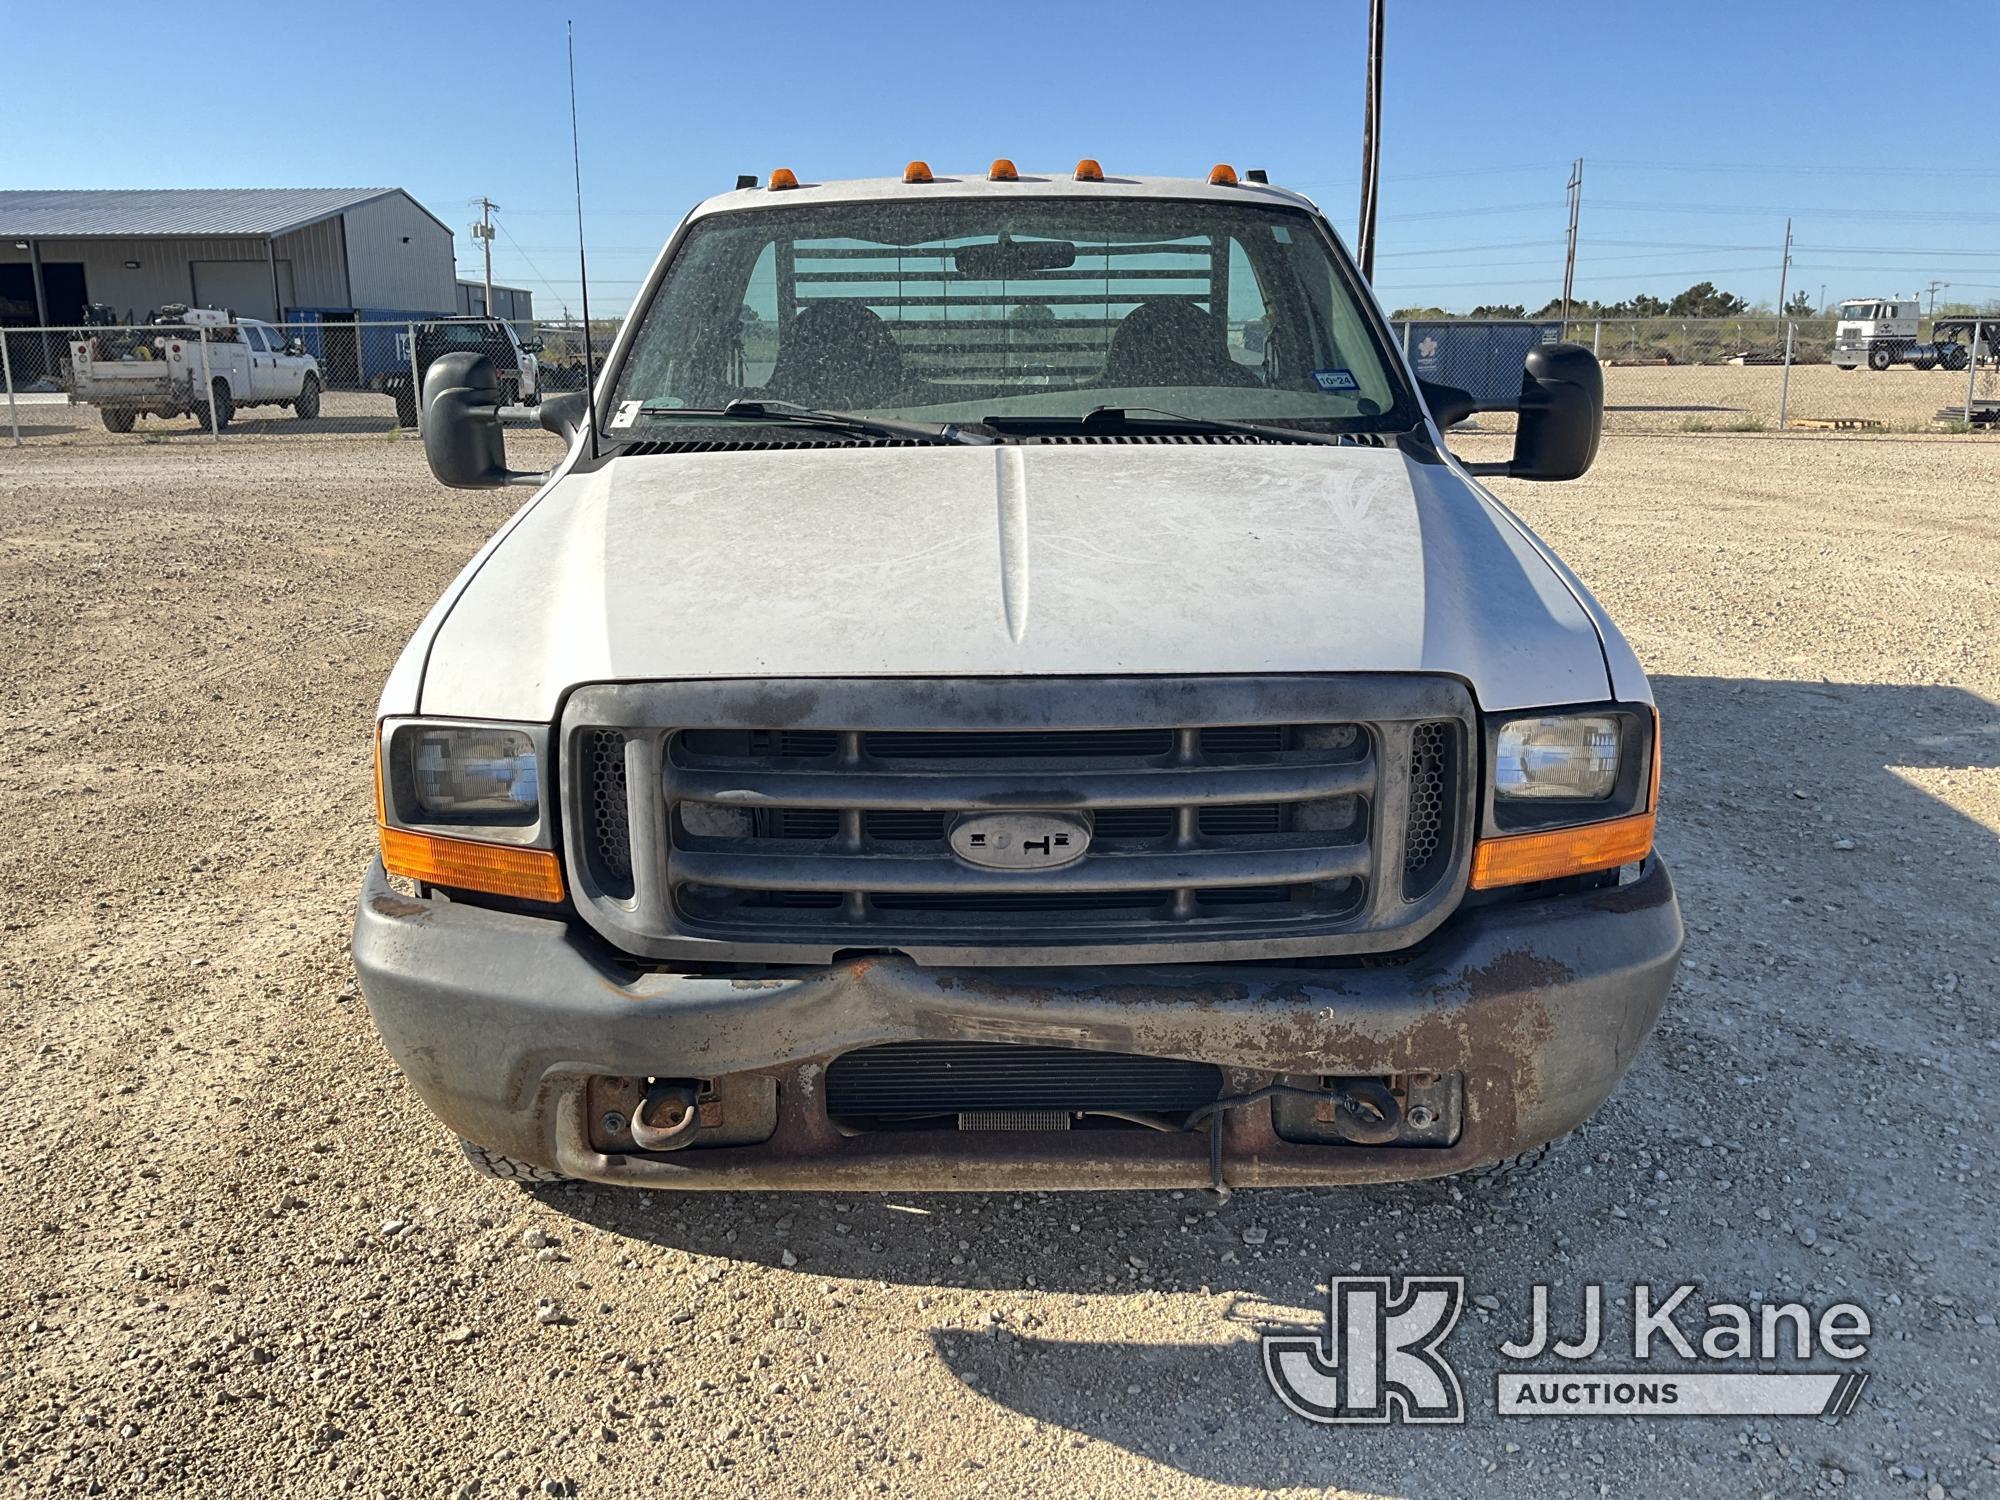 (San Angelo, TX) 2000 Ford F350 Flatbed Truck Runs and Moves, Paint/Rust/Body Damage